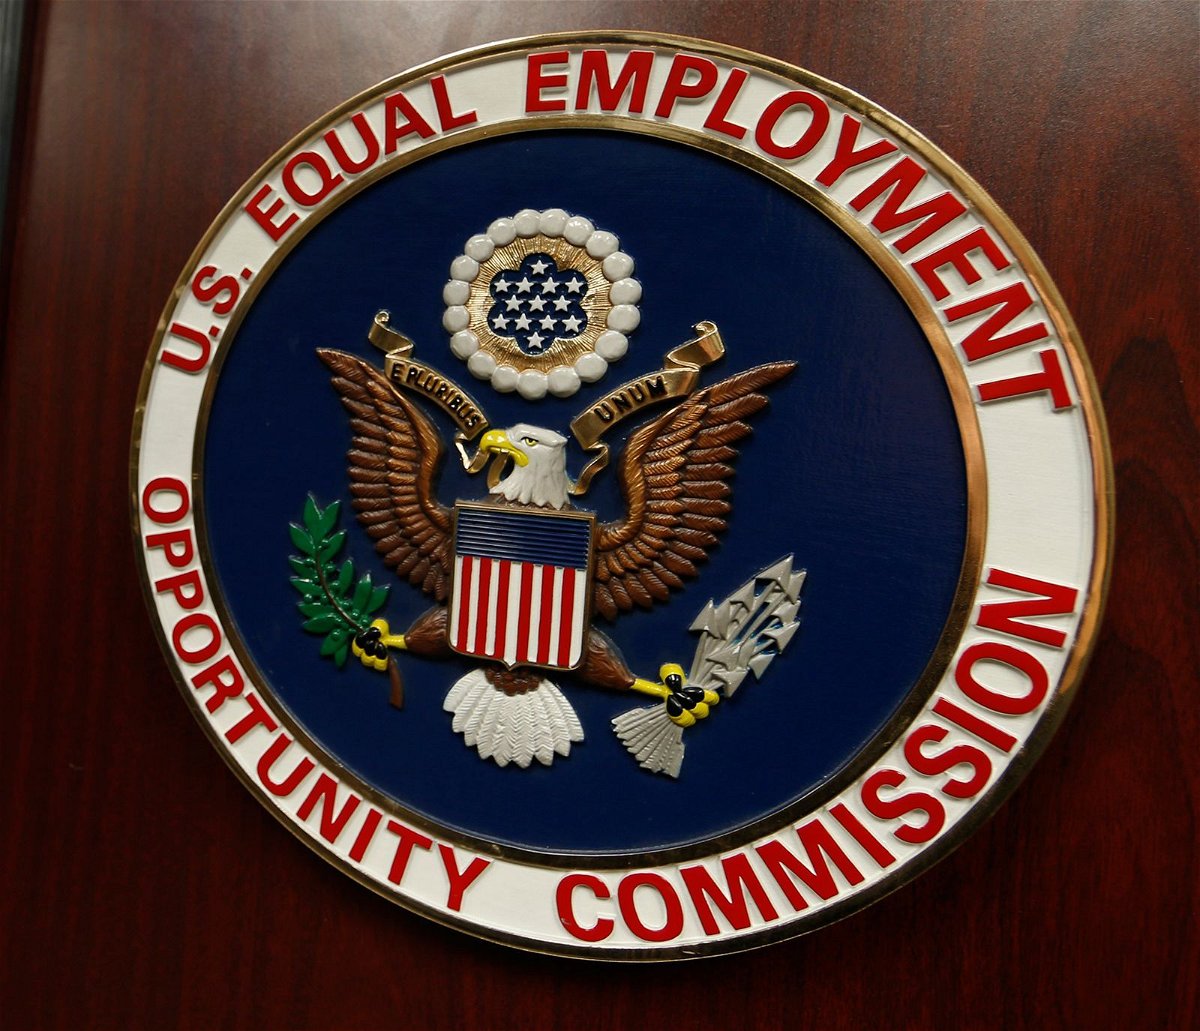 <i>David Zalubowski/AP via CNN Newsource</i><br/>The emblem of the US Equal Employment Opportunity Commission is shown on a podium in Denver